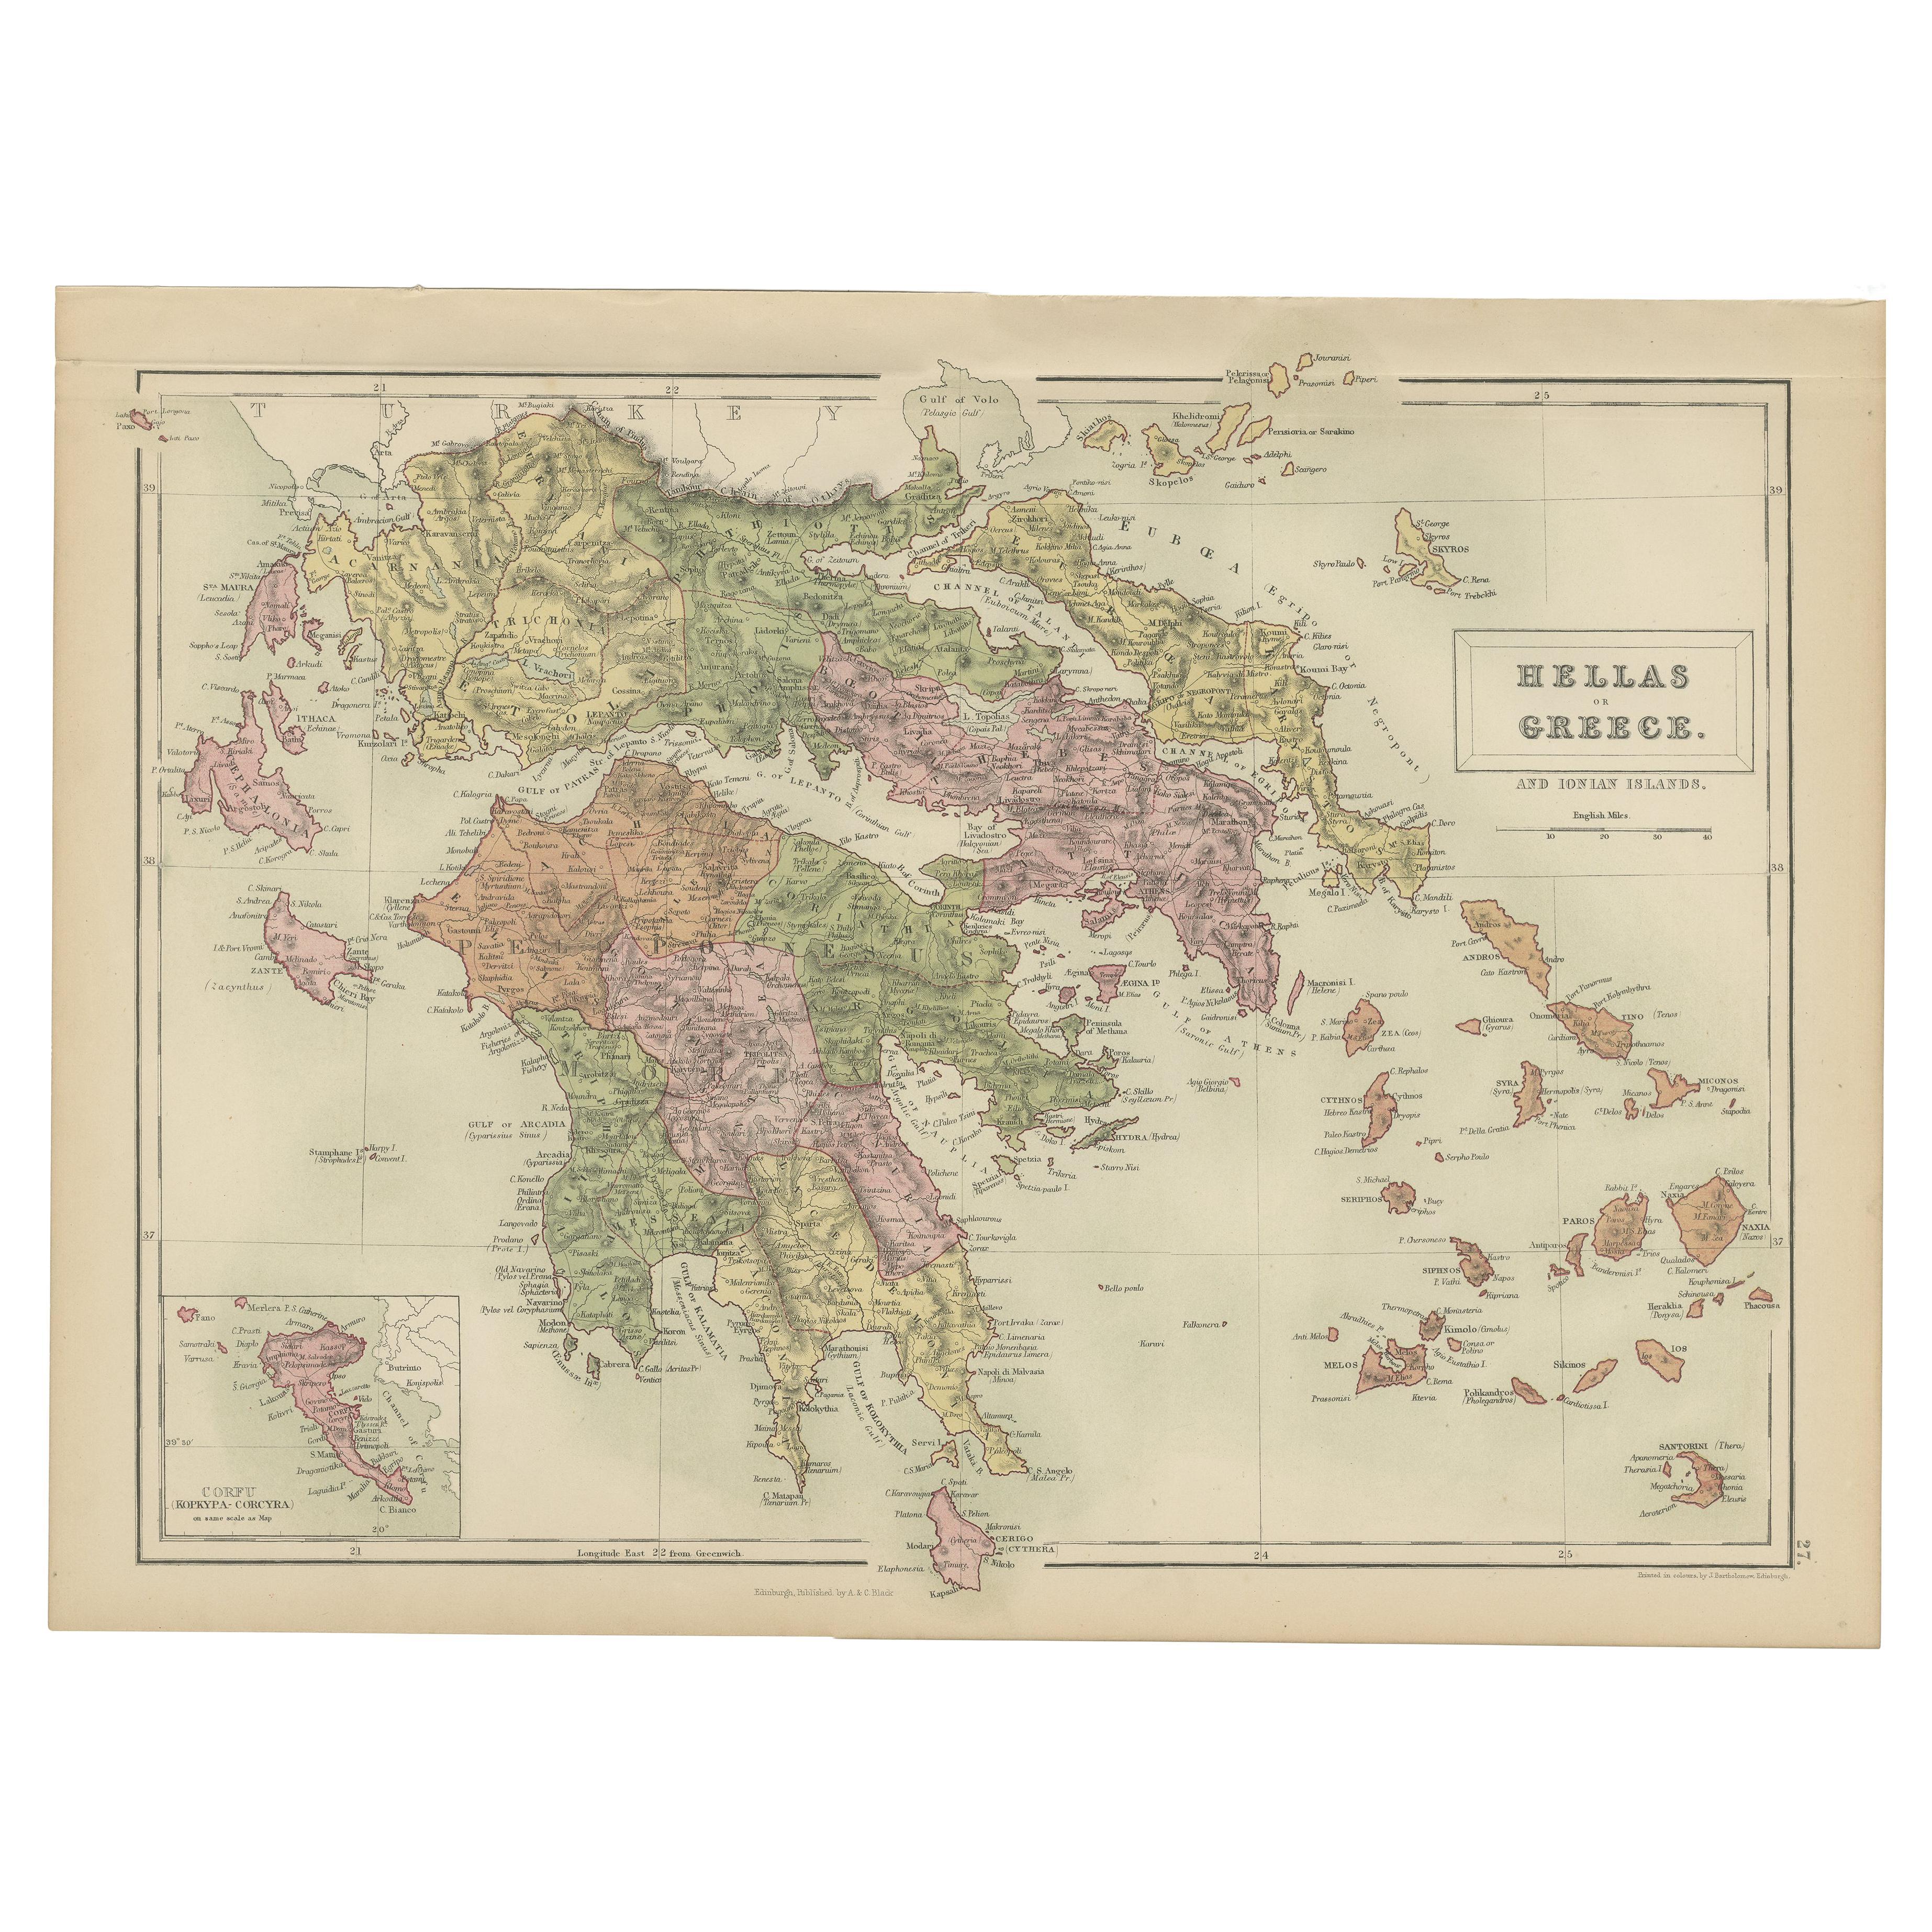 Antique Map of Greece and Ionian Islands by A & C. Black, 1870